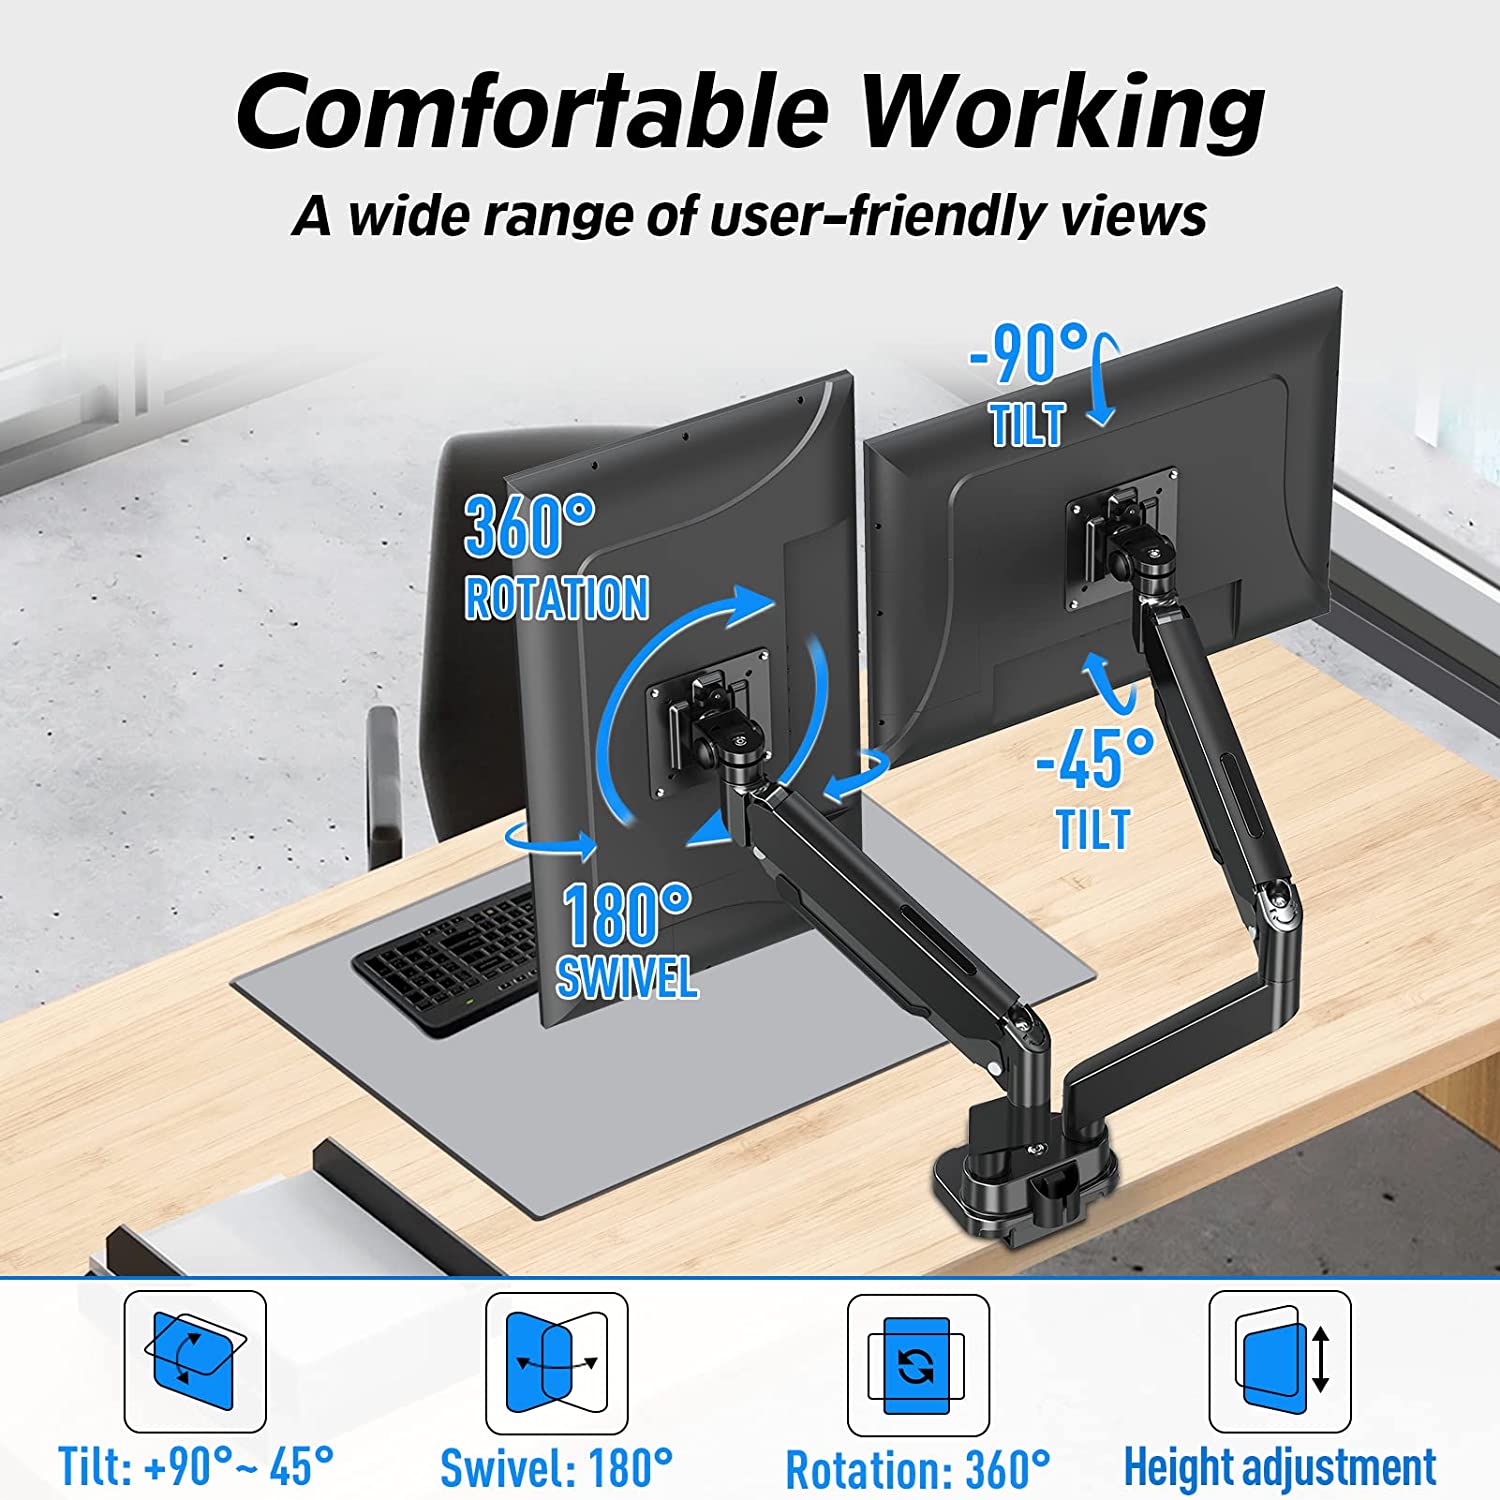  MOUNTUP Ultrawide Dual Monitor Desk Mount for 2 Computer Screen  Max 35 Inch, Adjustable Gas Spring Double Monitor Arm, 6.6-30.9lbs Heavy  Duty Monitor Stand Holder, VESA Bracket With Clamp/Grommet Base 